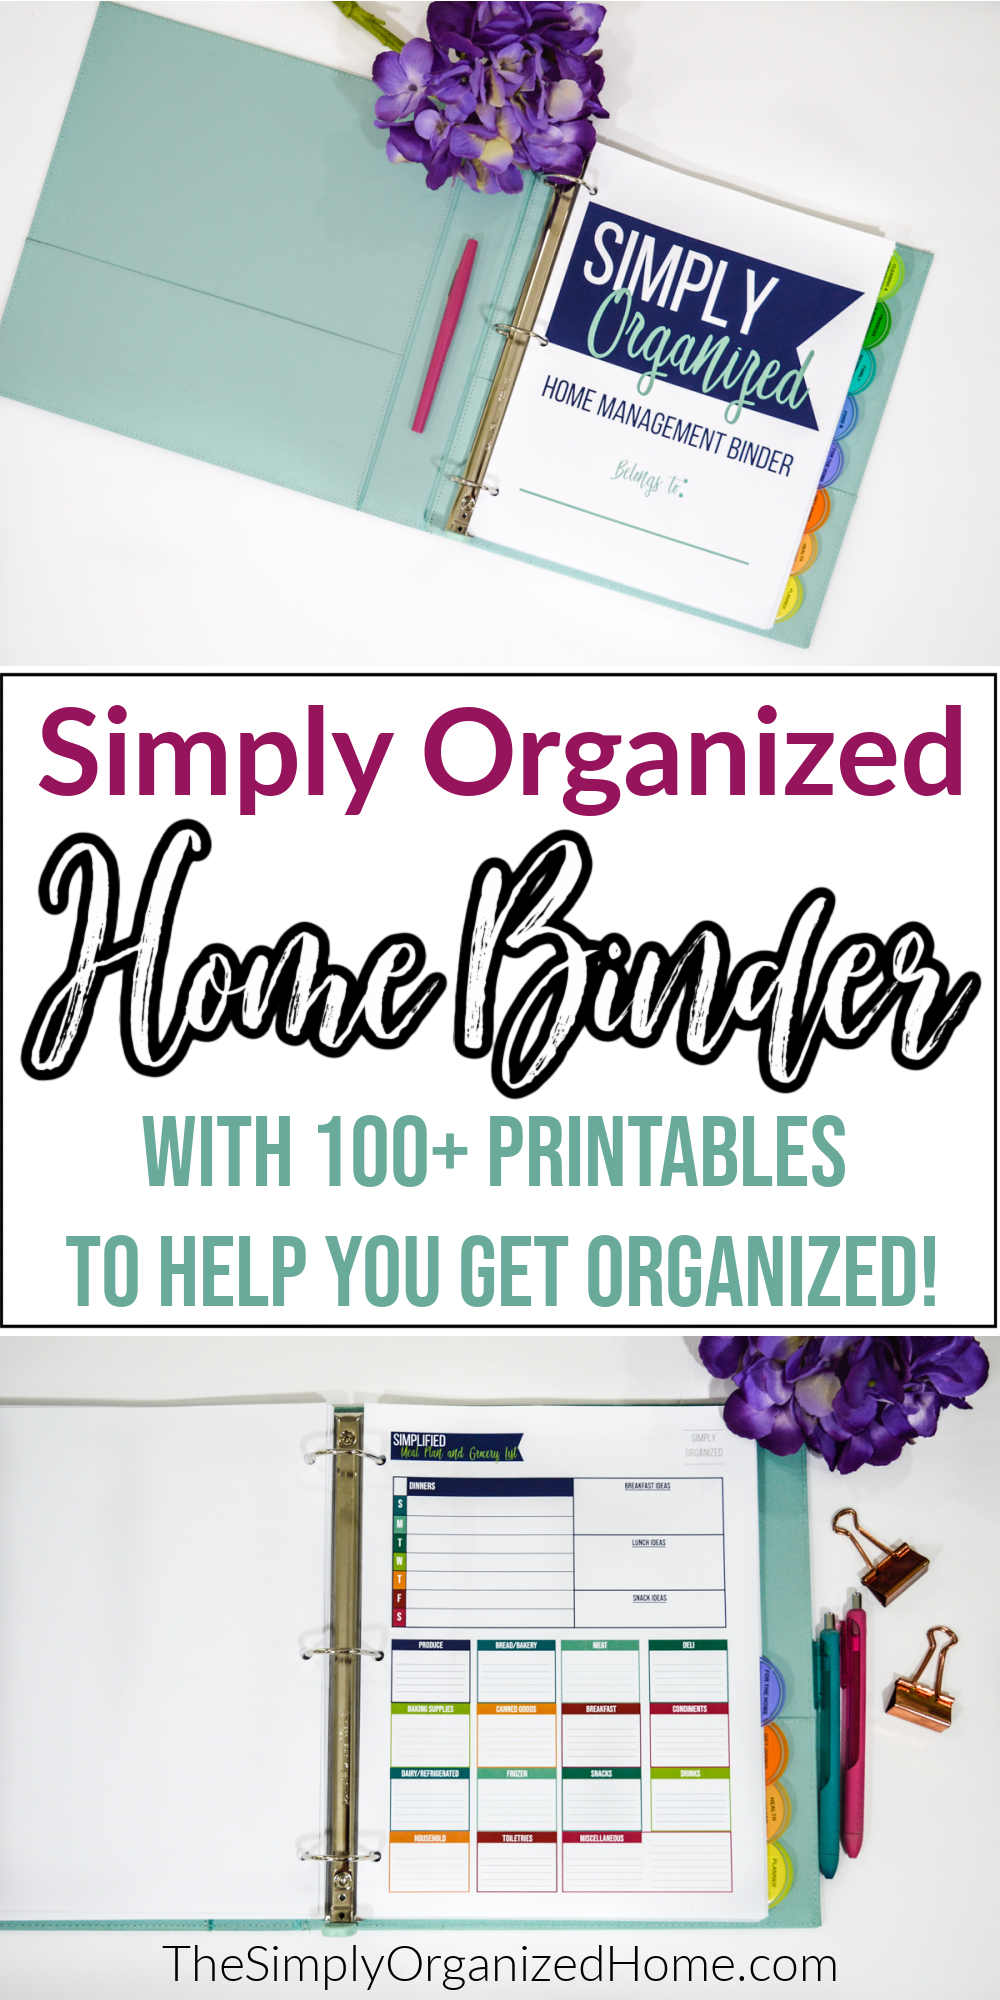 Household Supplies List Inventory Template  Home inventory, Inventory  printable, Home management binder